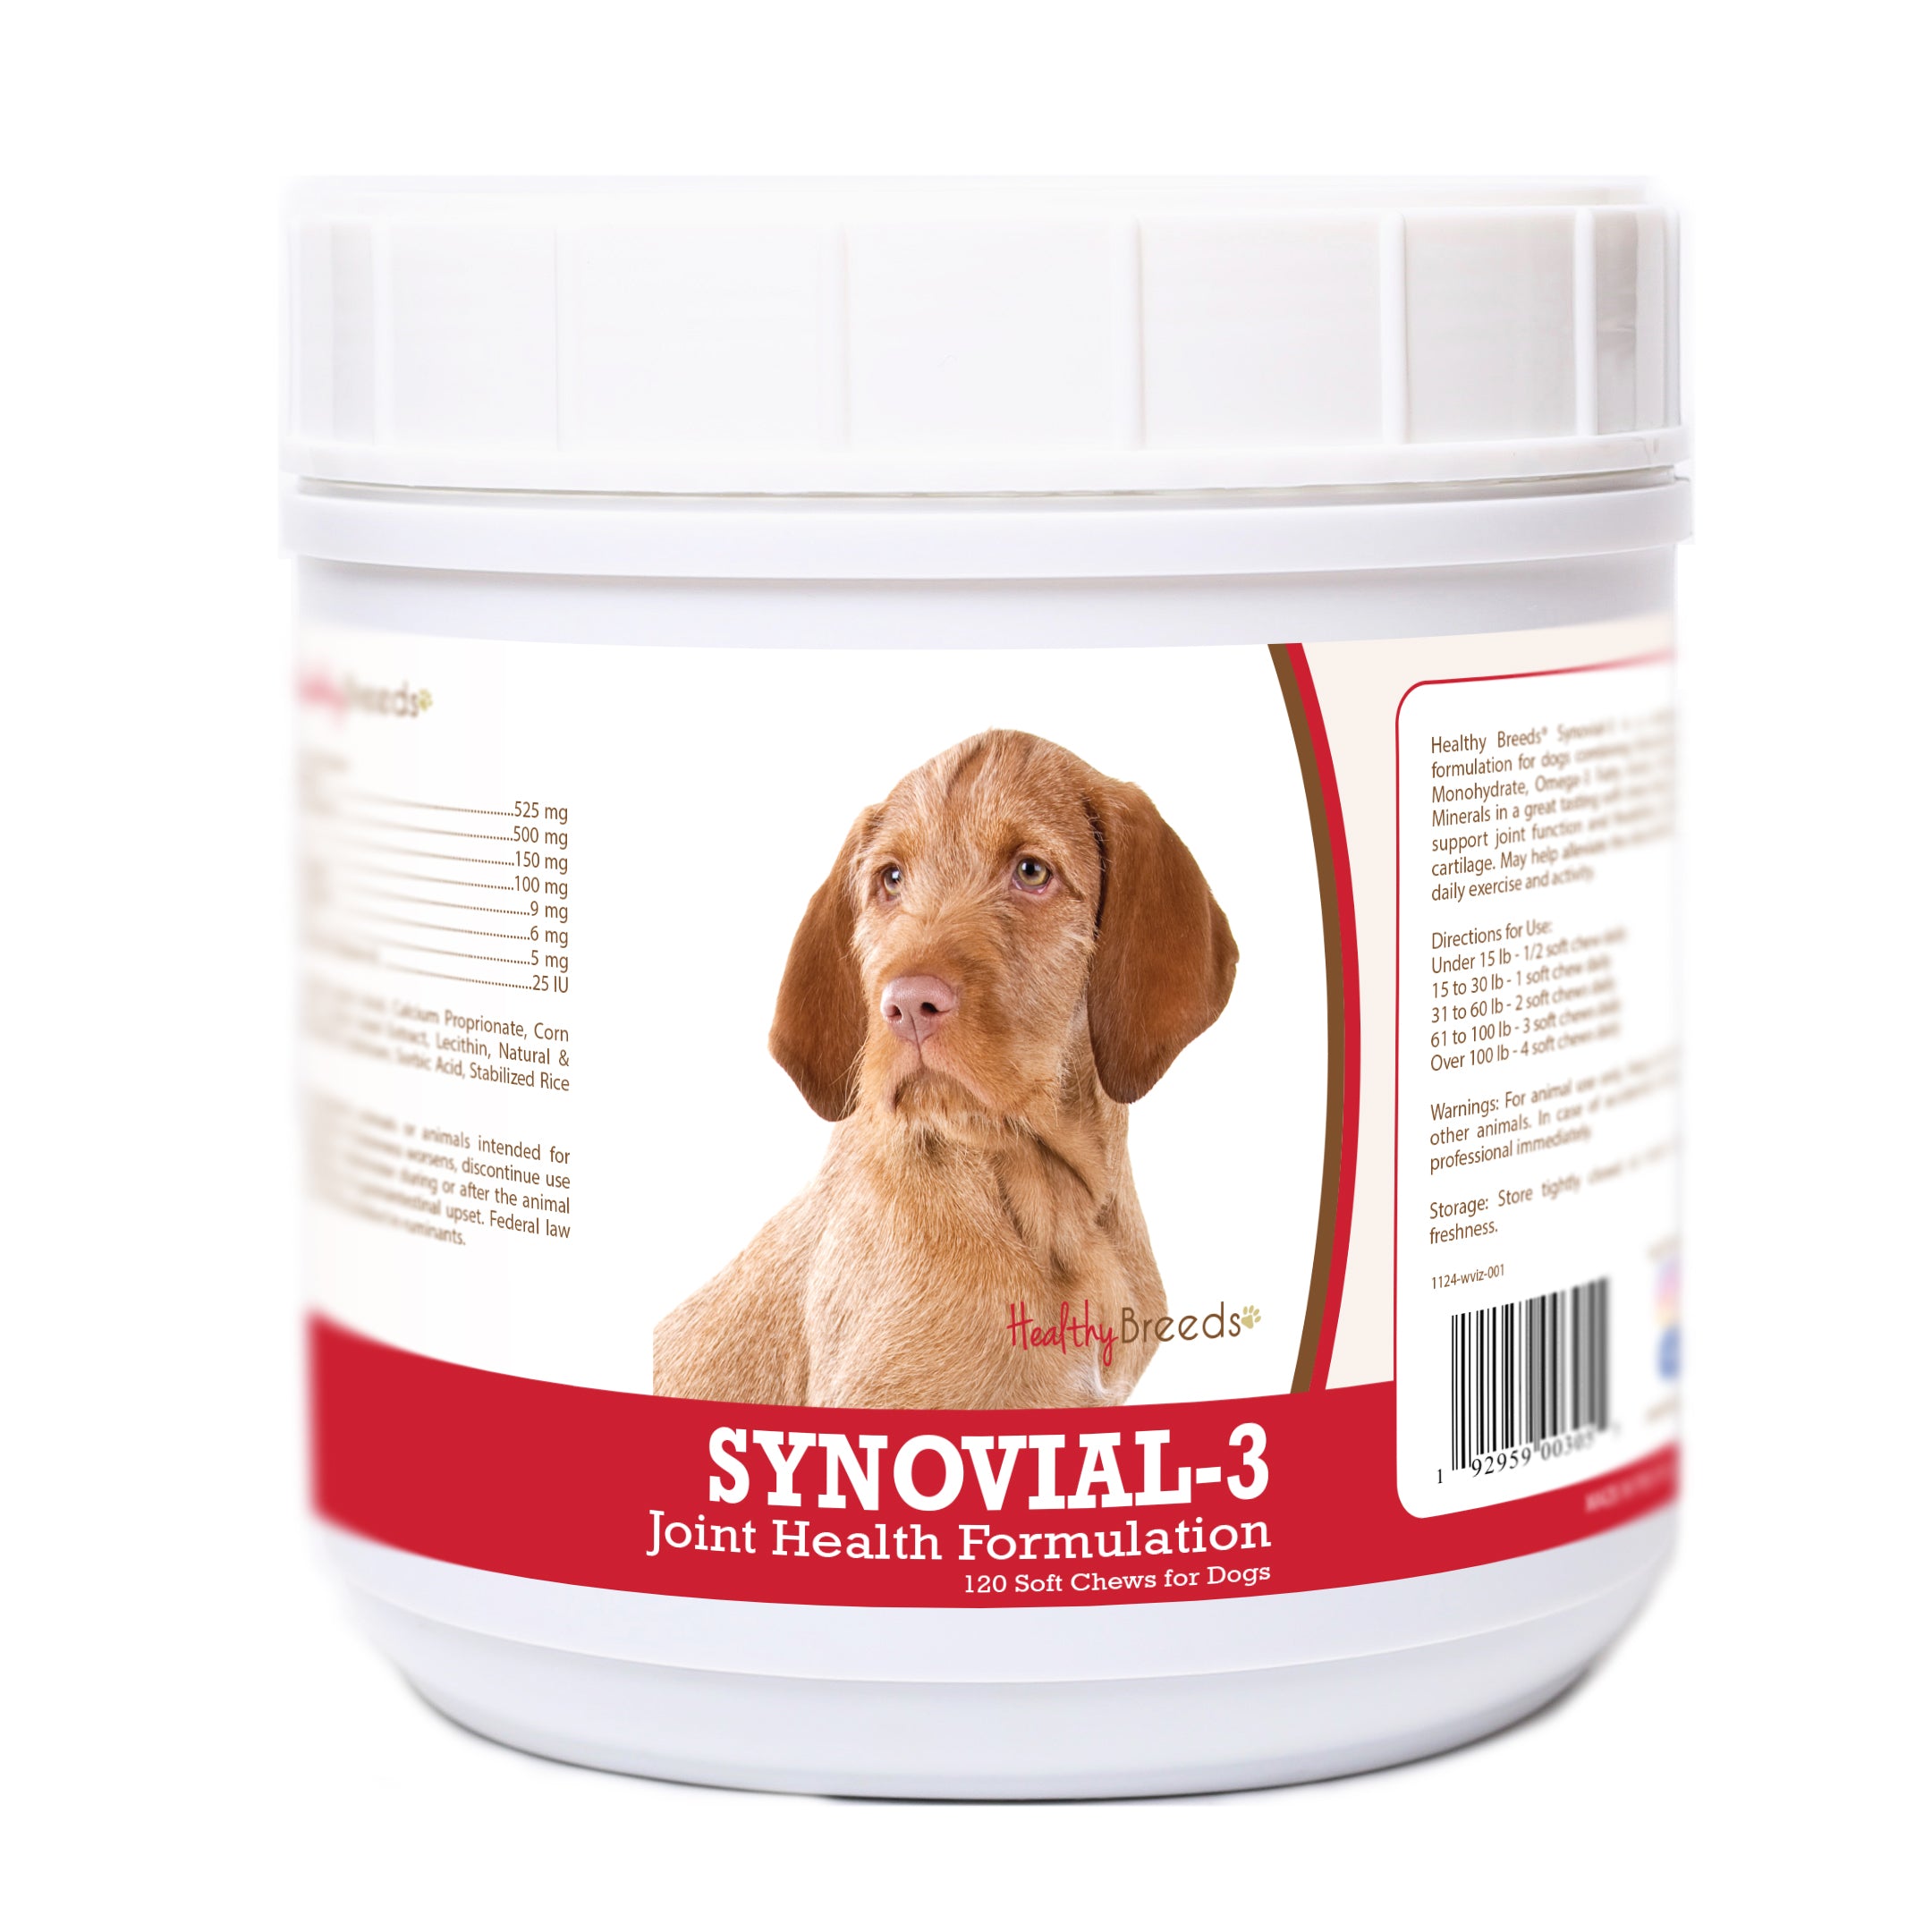 Wirehaired Vizsla Synovial-3 Joint Health Formulation Soft Chews 120 Count